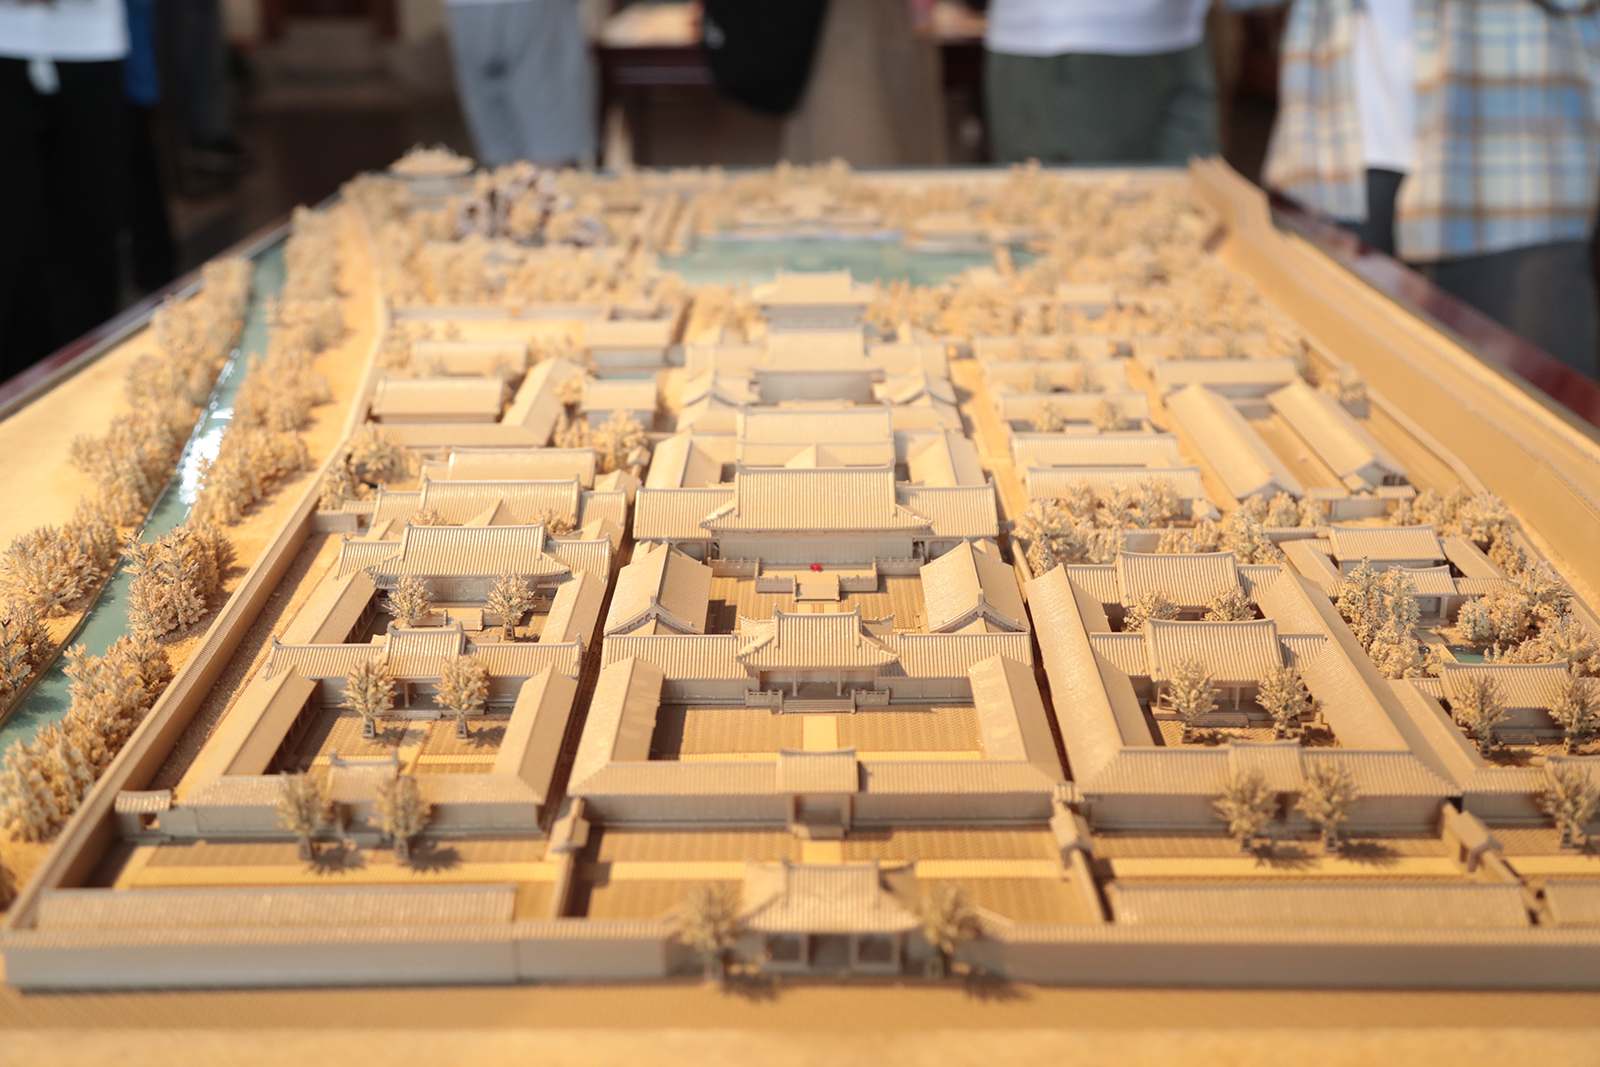 A model of the Deshou Palace is seen on display at the reconstructed Chonghua Hall of the Deshou Palace Ruins Museum in Hangzhou, Zhejiang Province. /CGTN